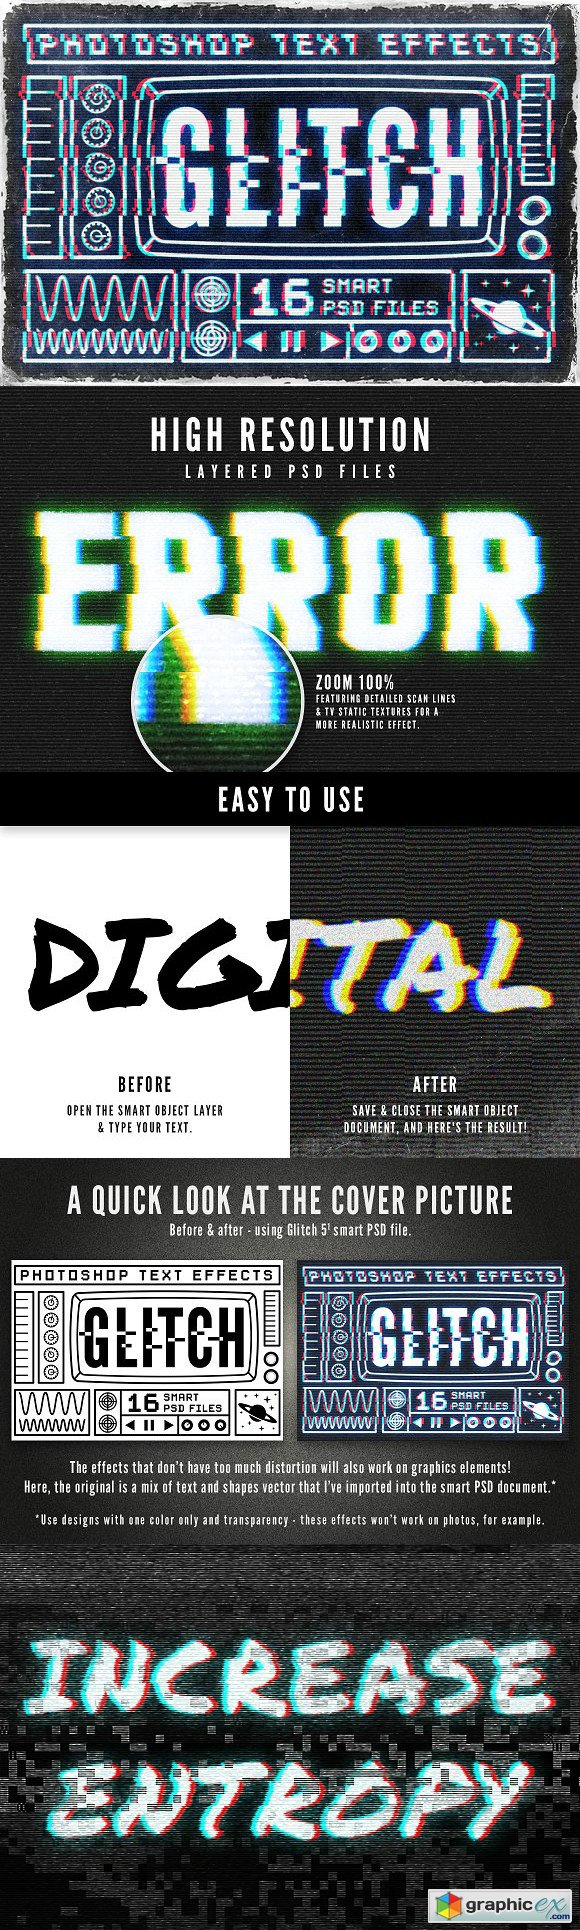 Glitch text effects for Photoshop